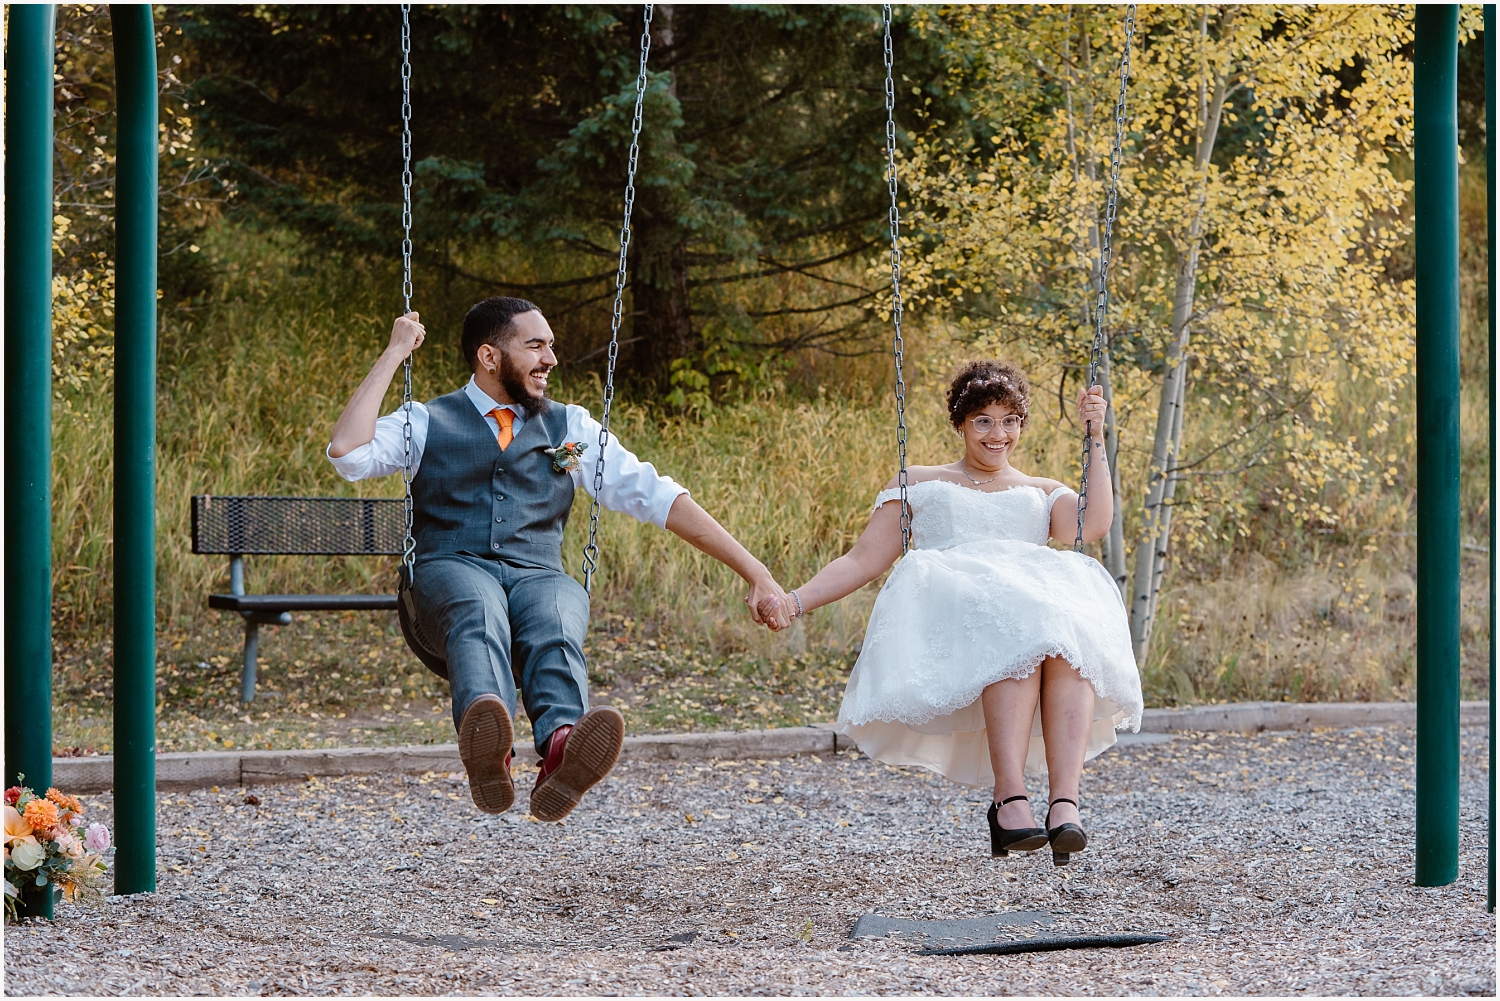 Couples swings on swing set during elopement day